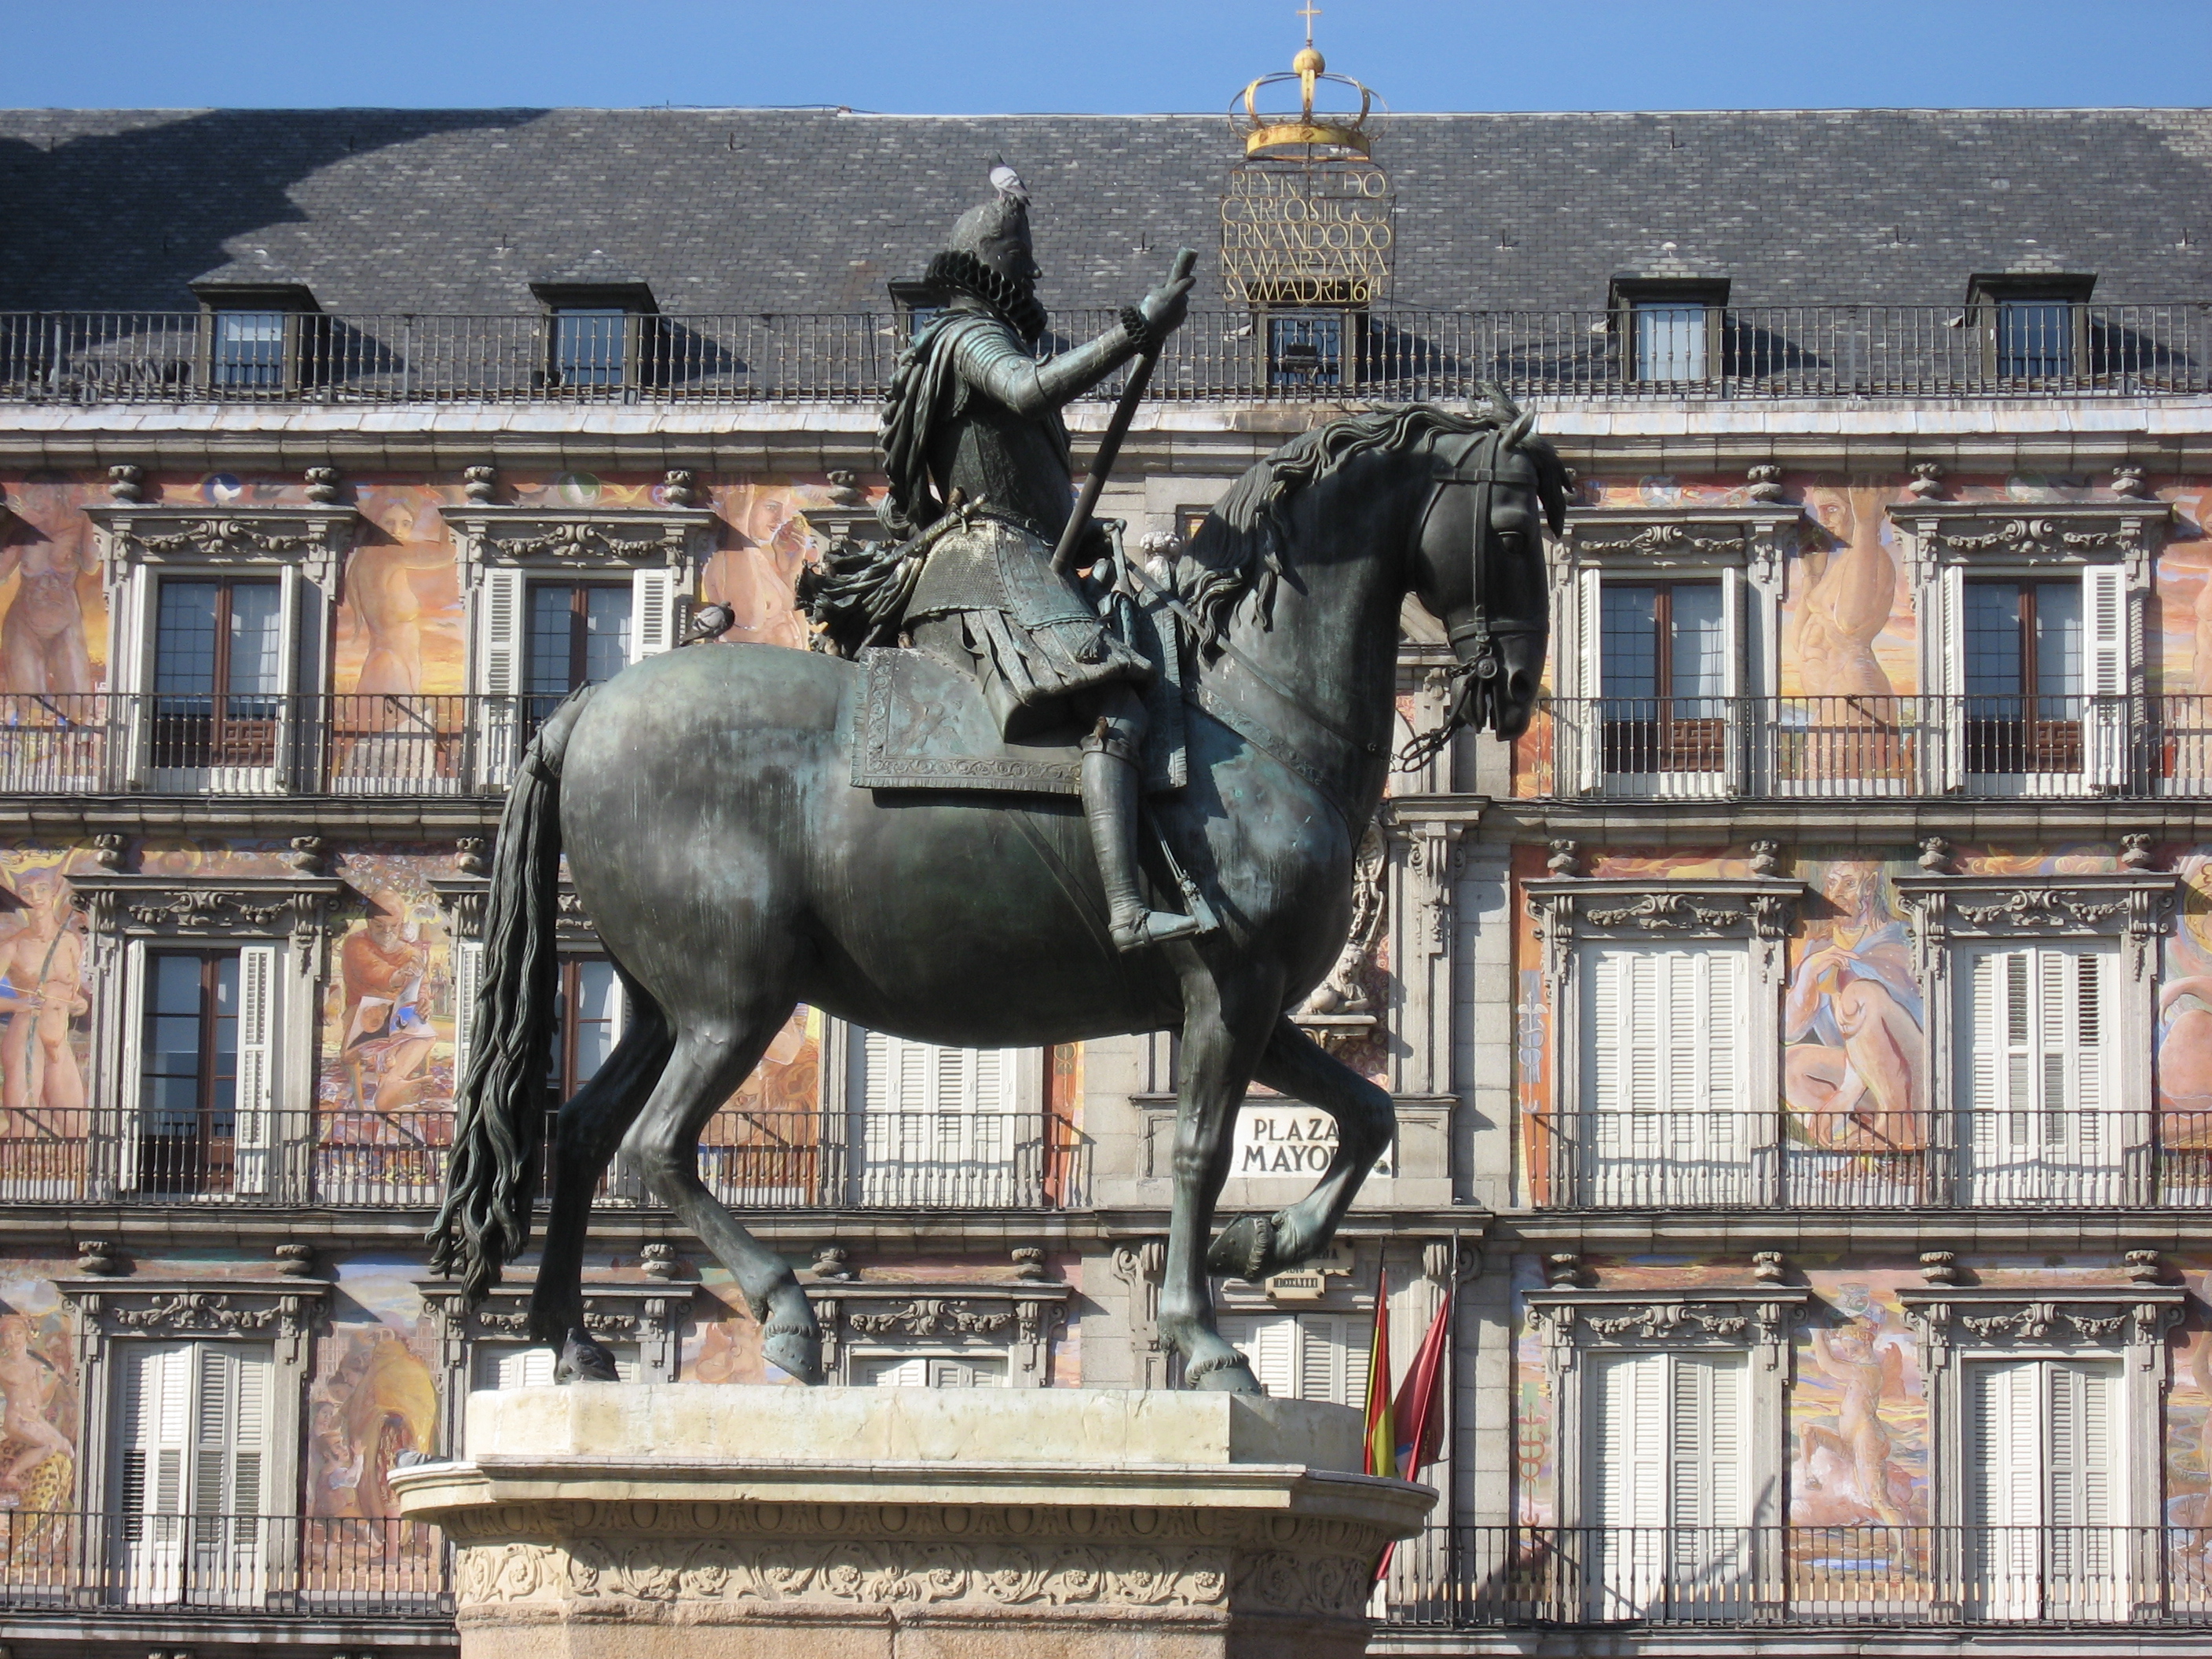 Statue of King Philip III in front of its bright red facades of Plaza Major, Madrid, Spain.